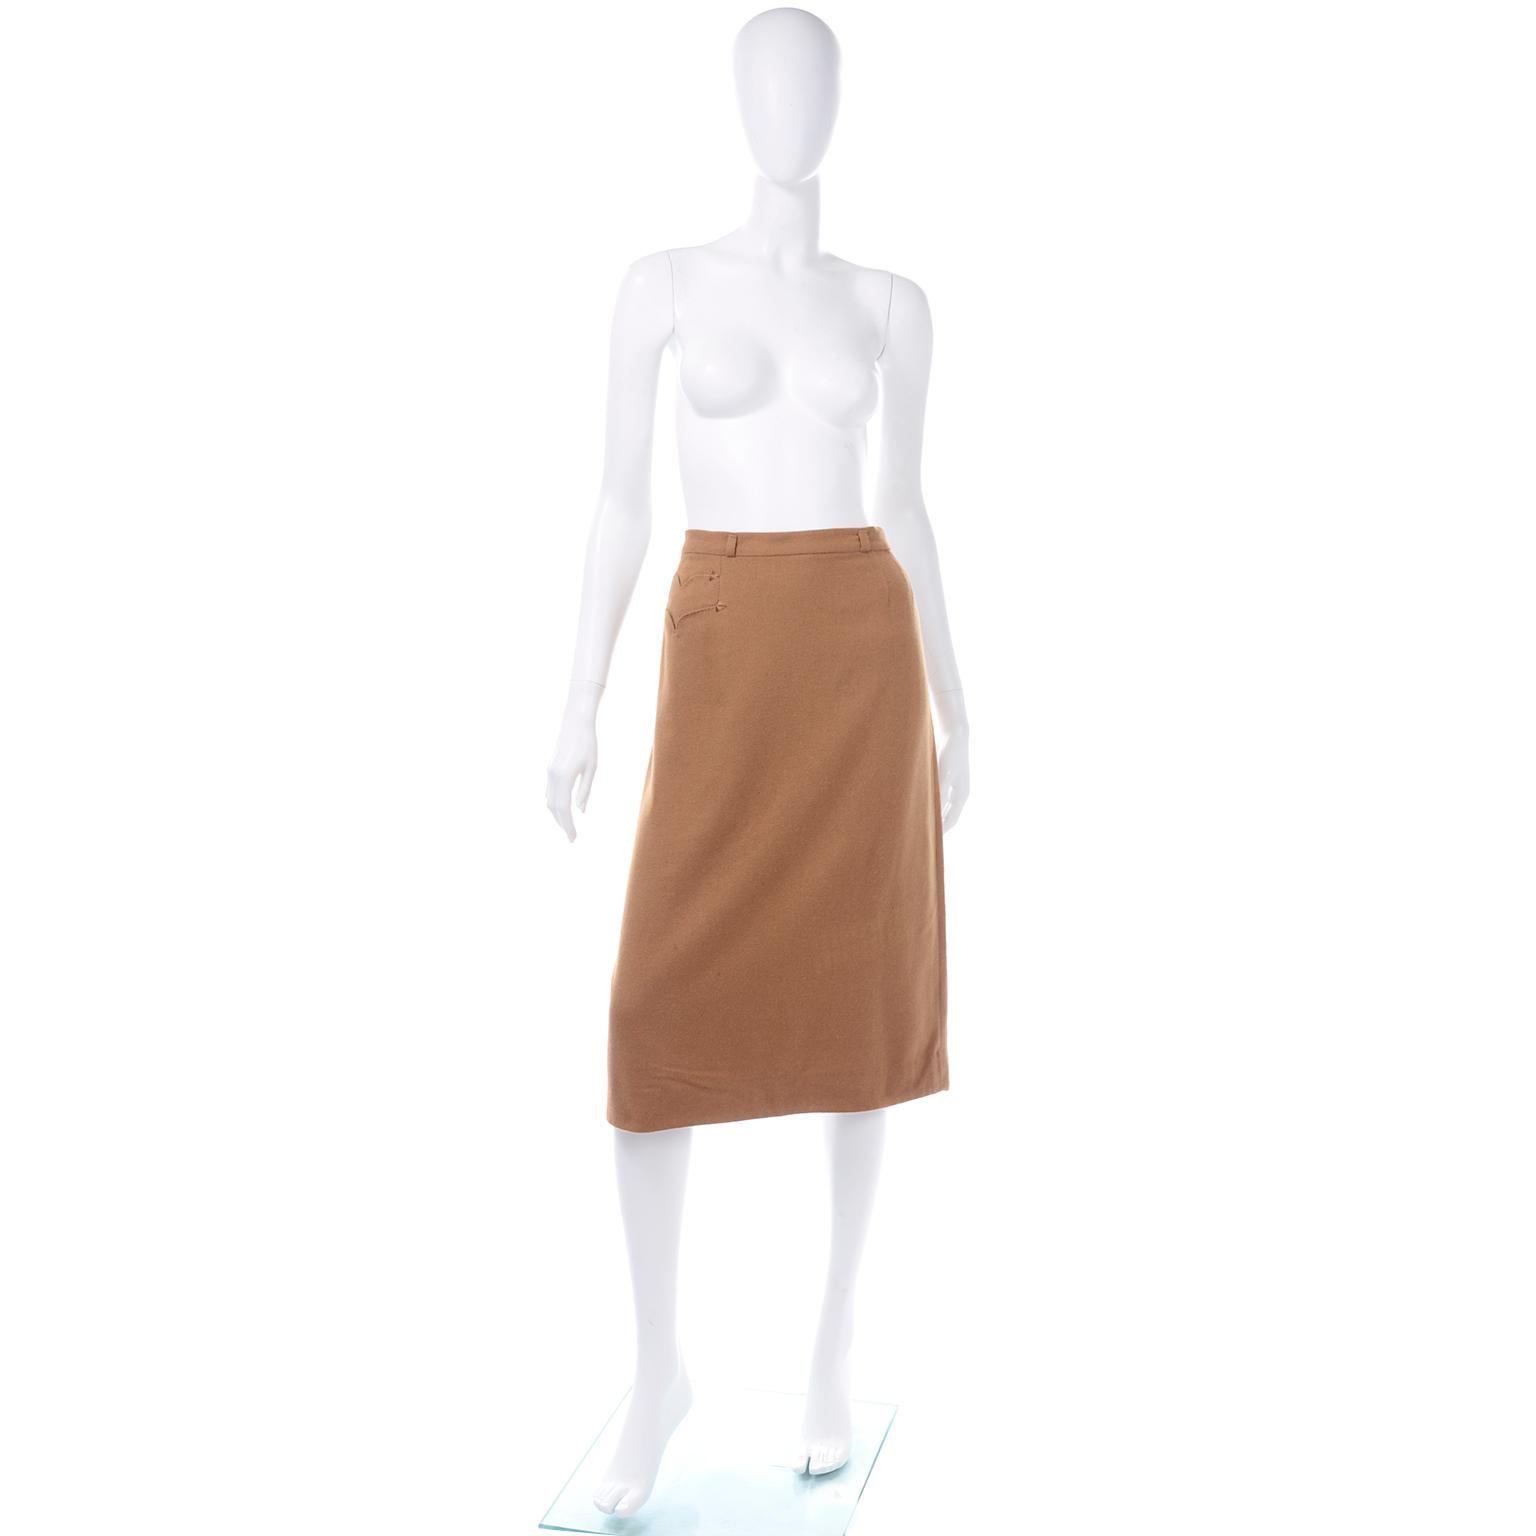 This is an incredibly soft, ultra fine vintage 1950's skirt from Evan Picone in toffee brown 100% Vicuna from Einiger.  This beautiful skirt has two western styled pockets on one hip and is fully lined. The skirt hits below the knee and is in a